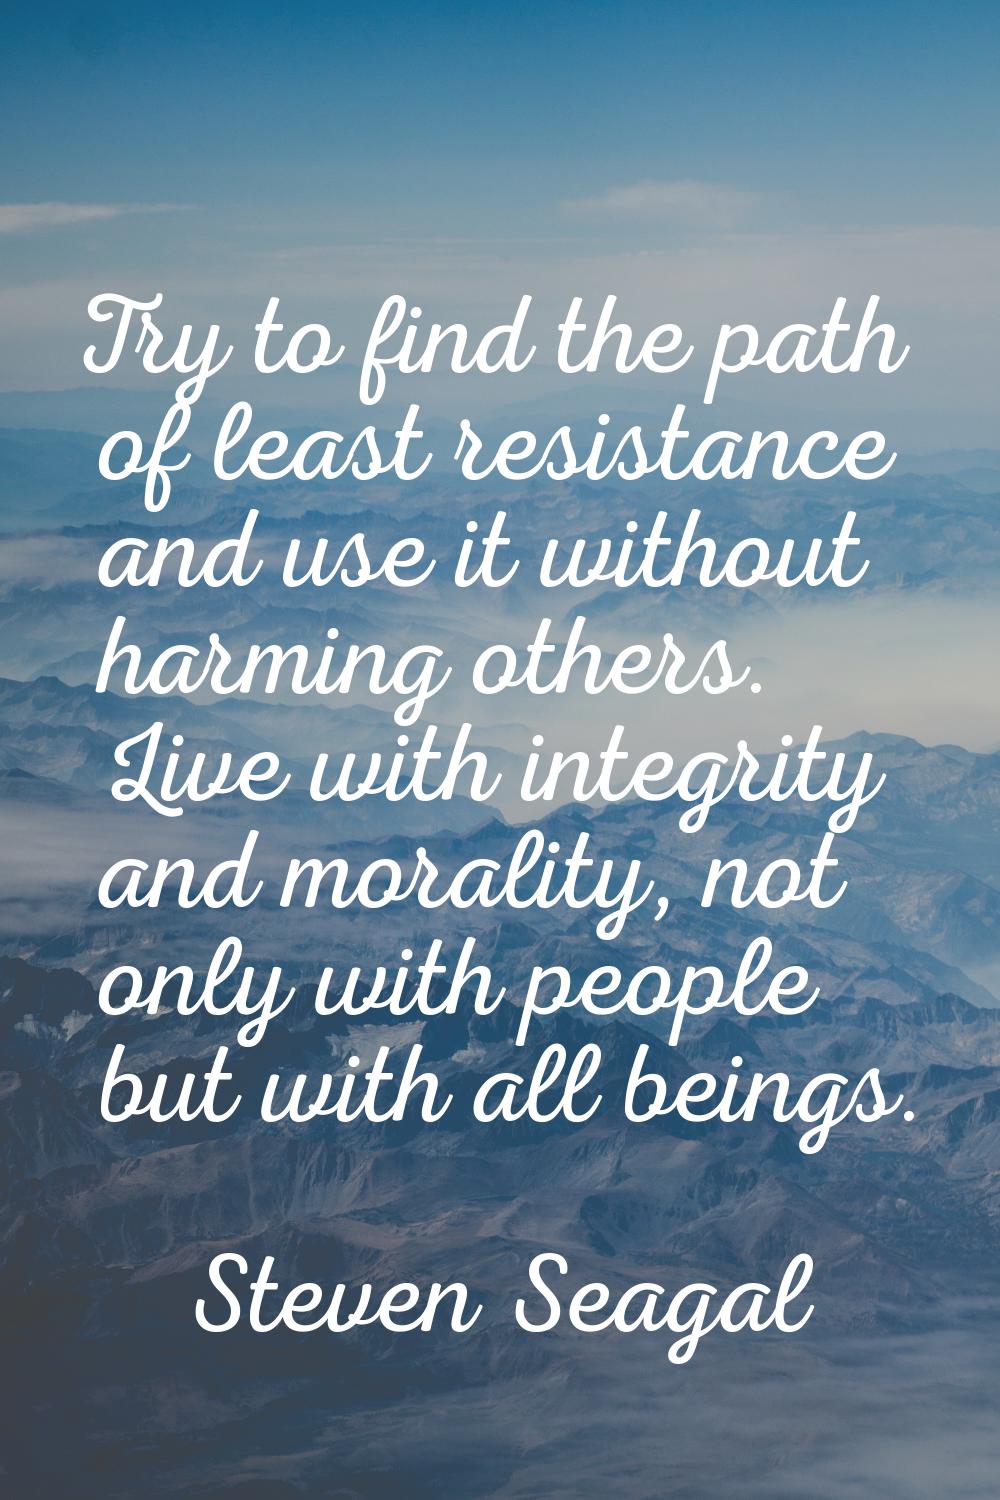 Try to find the path of least resistance and use it without harming others. Live with integrity and